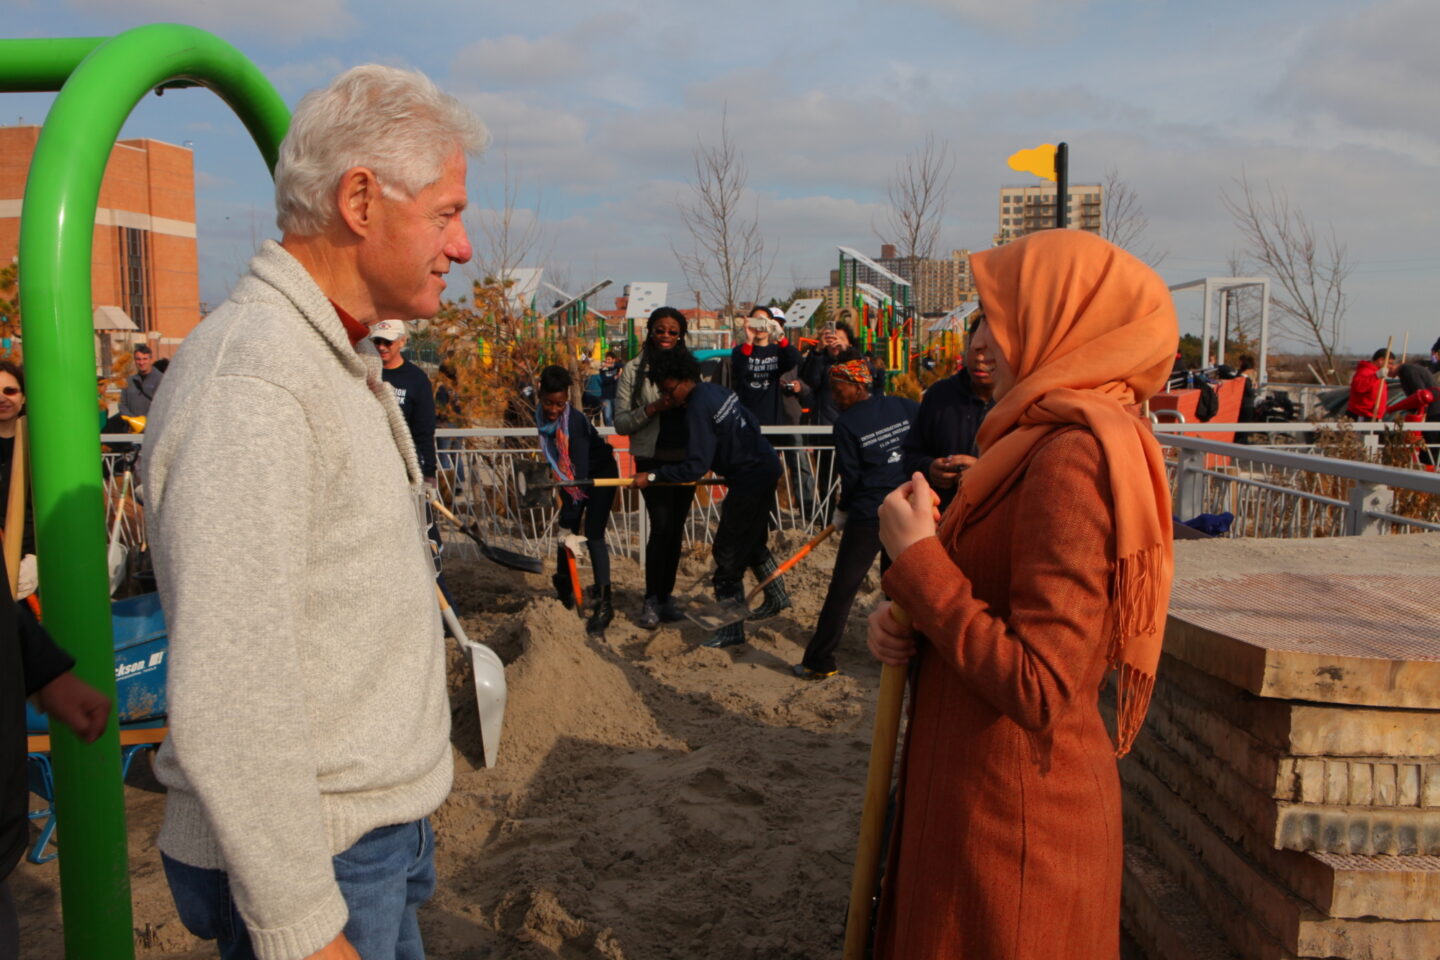 President Clinton and volunteers on a playground